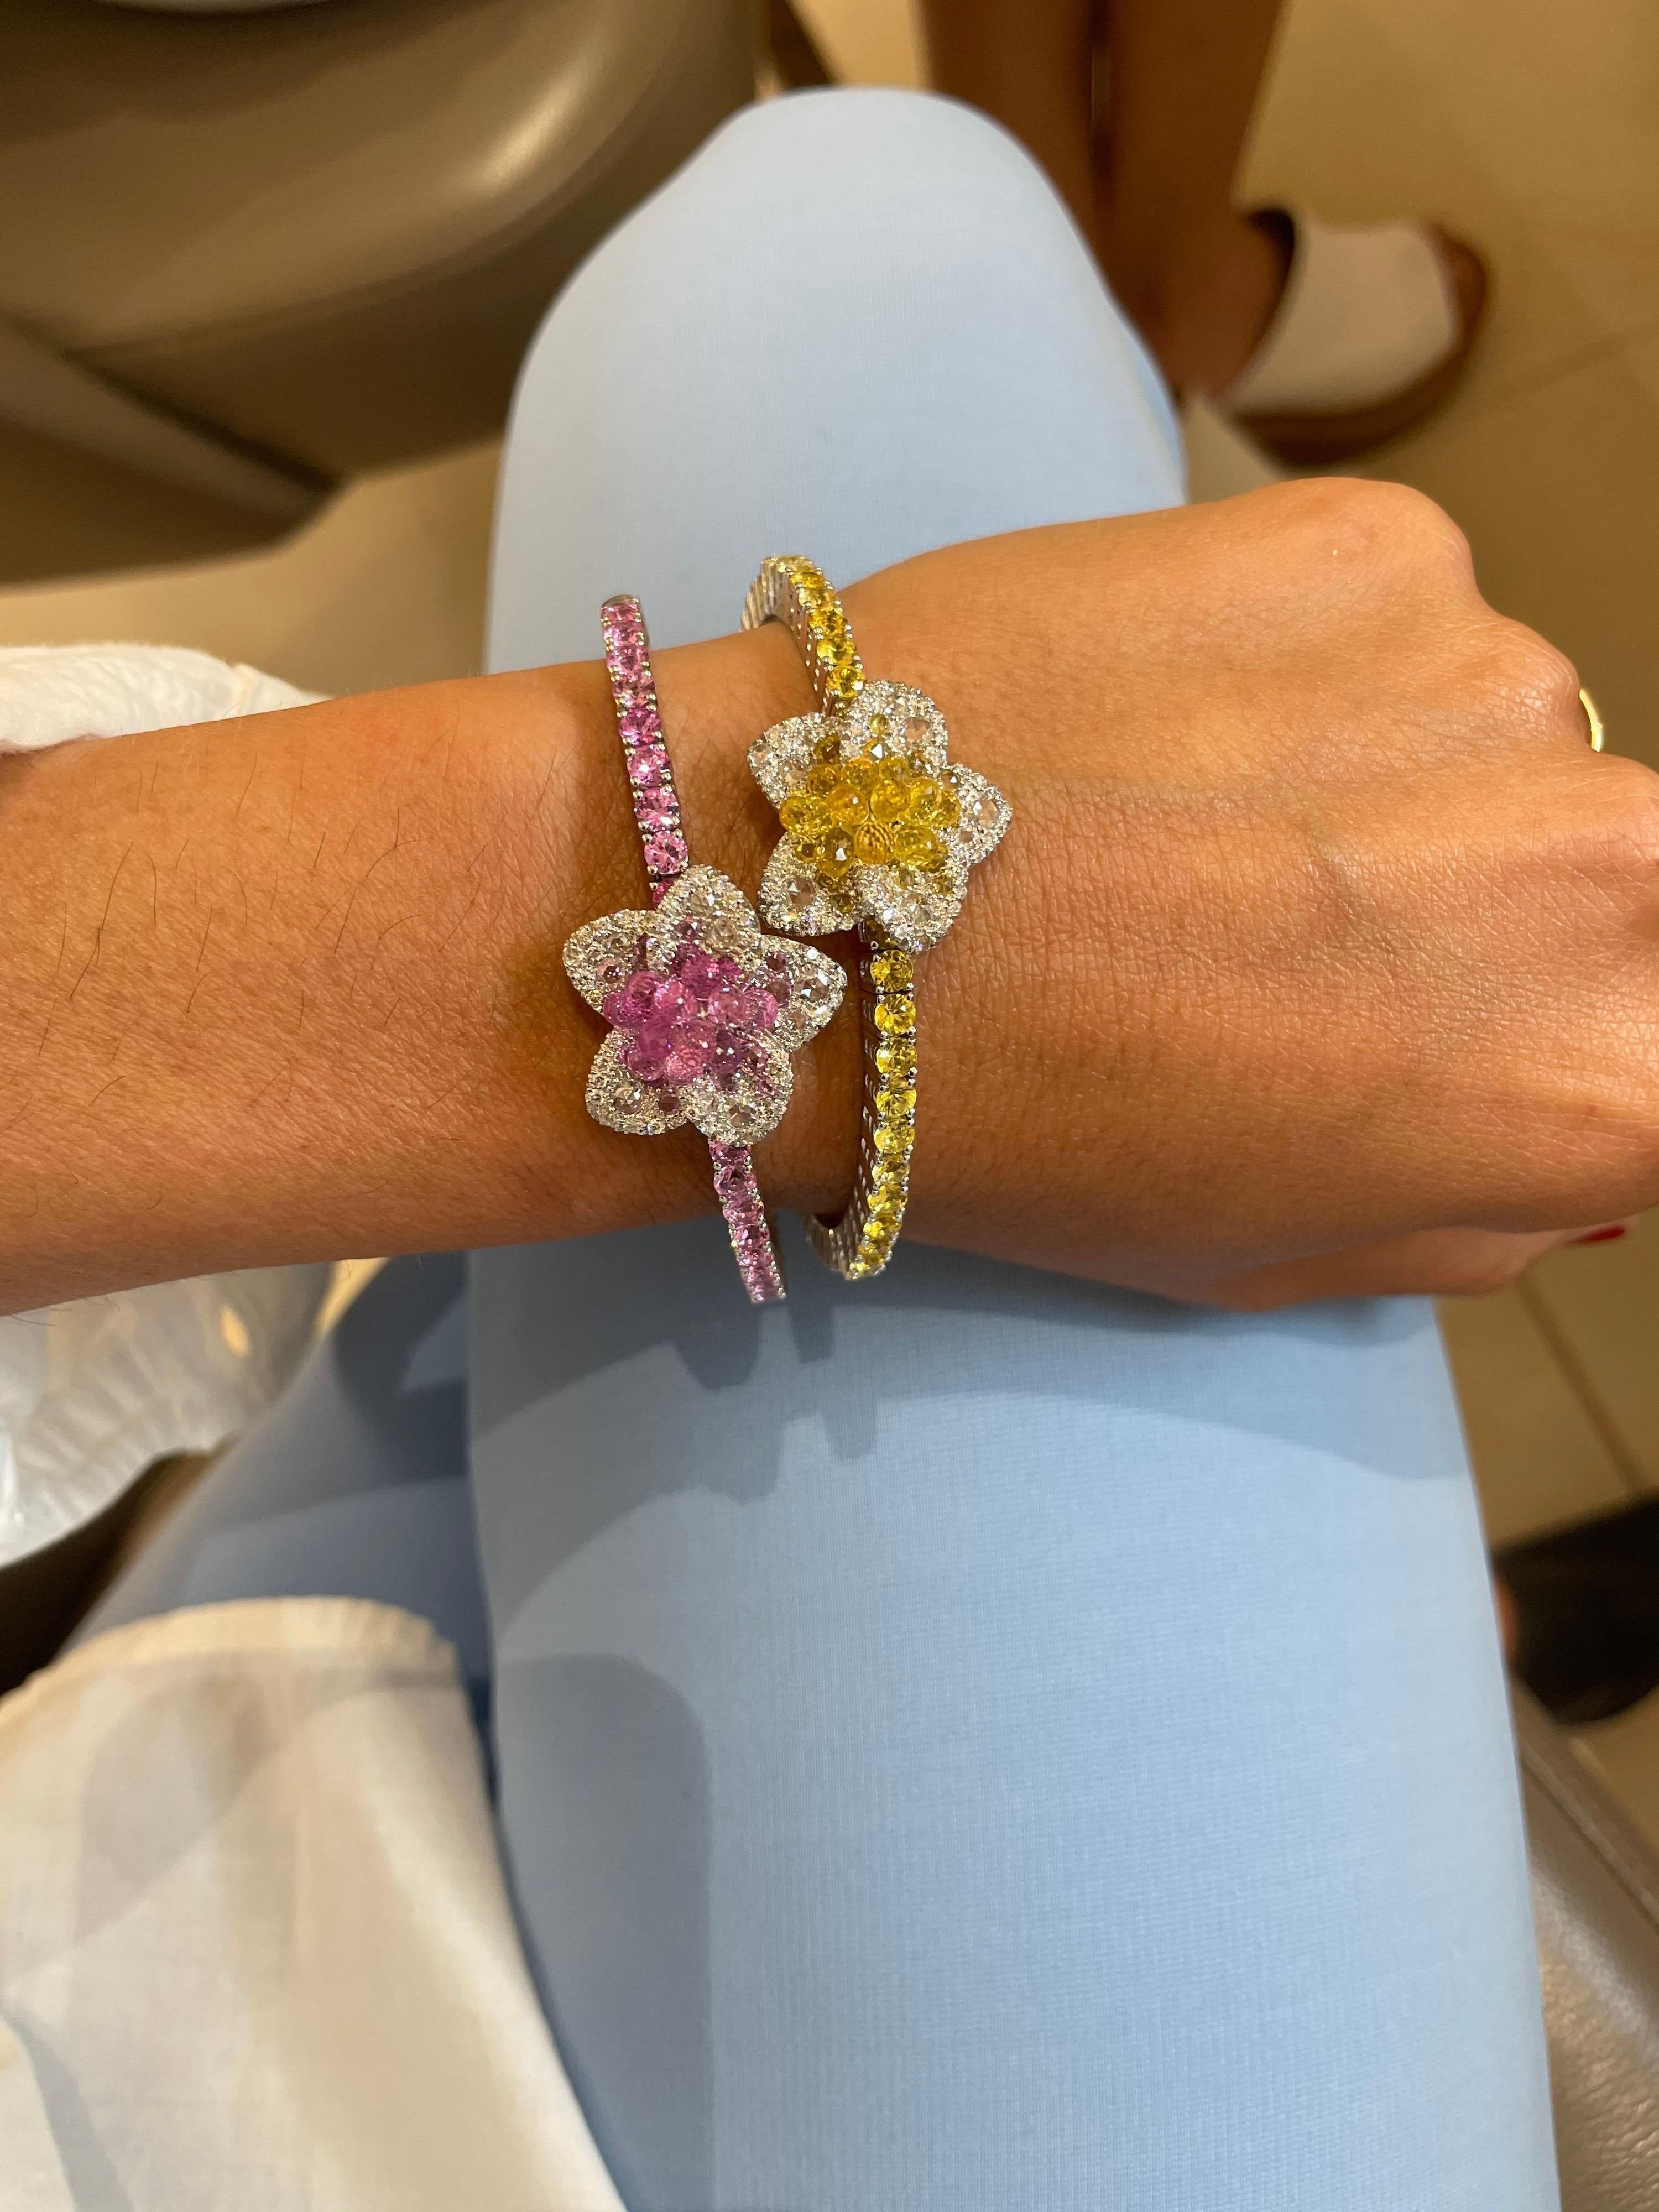 This uniquely stunning flower bracelet is composed of .87 carats of round brilliant and rose cut diamonds, and 8.66 carats round and briolette cut pink sapphires.
The briolette sapphires at the center of the diamond flower are raised , allowing them